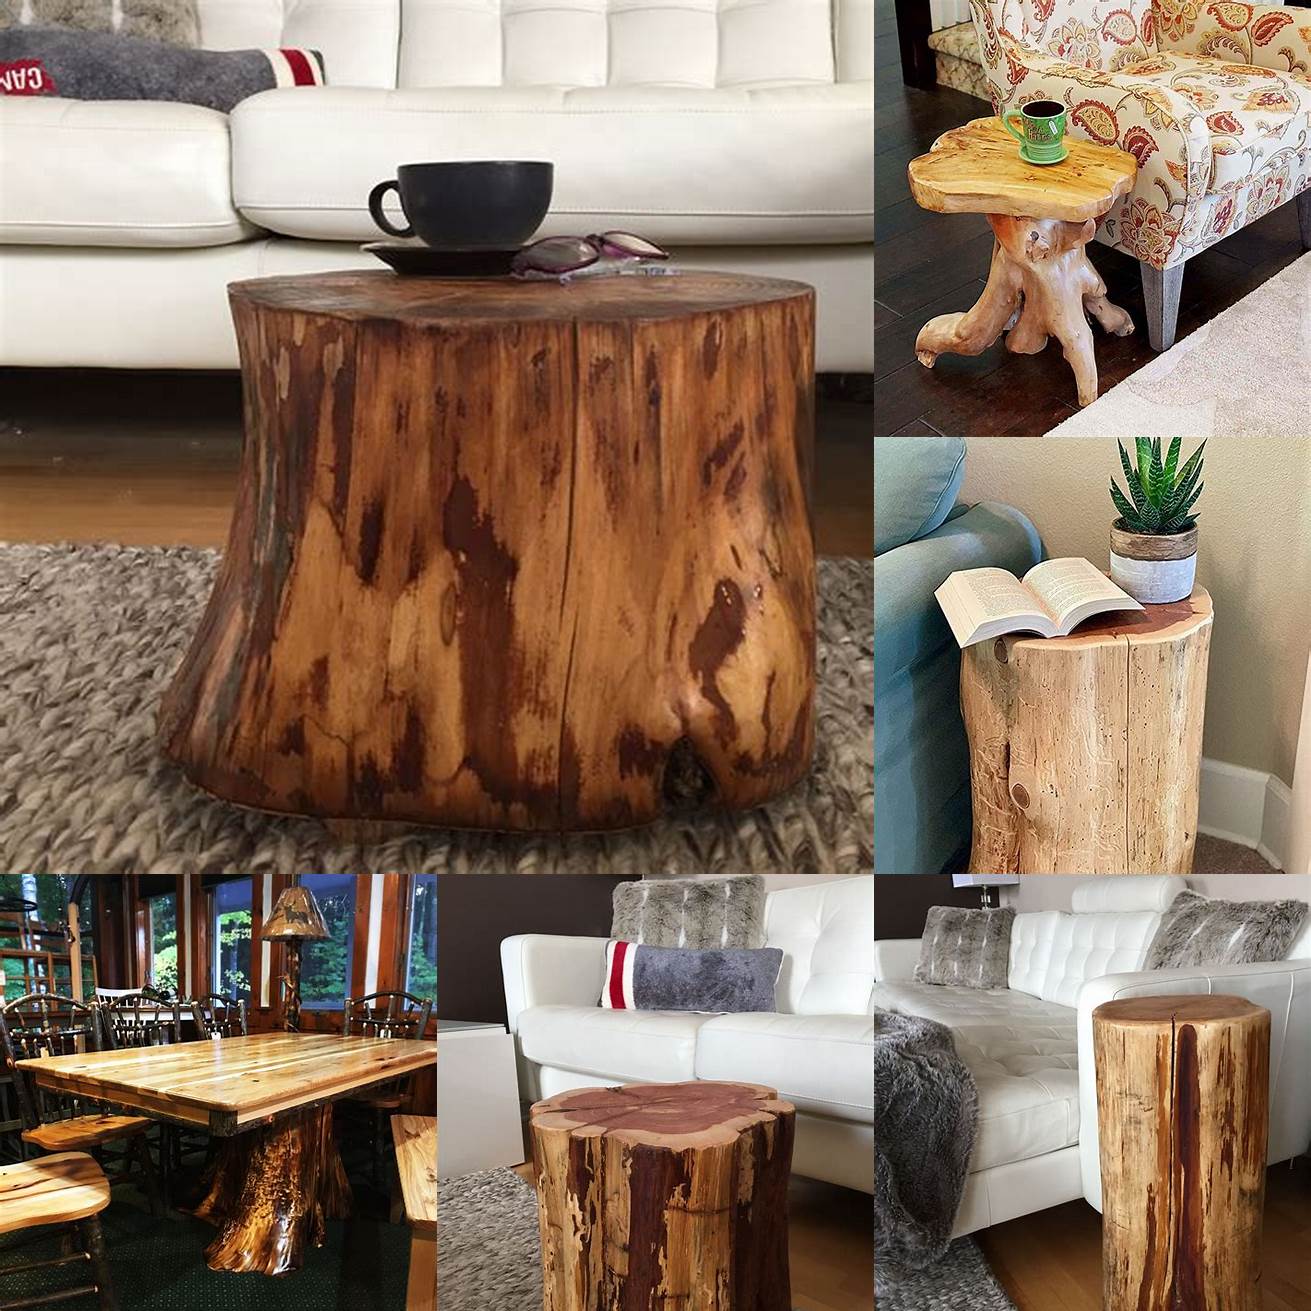 This tree stump table is a natural and rustic addition to any living space